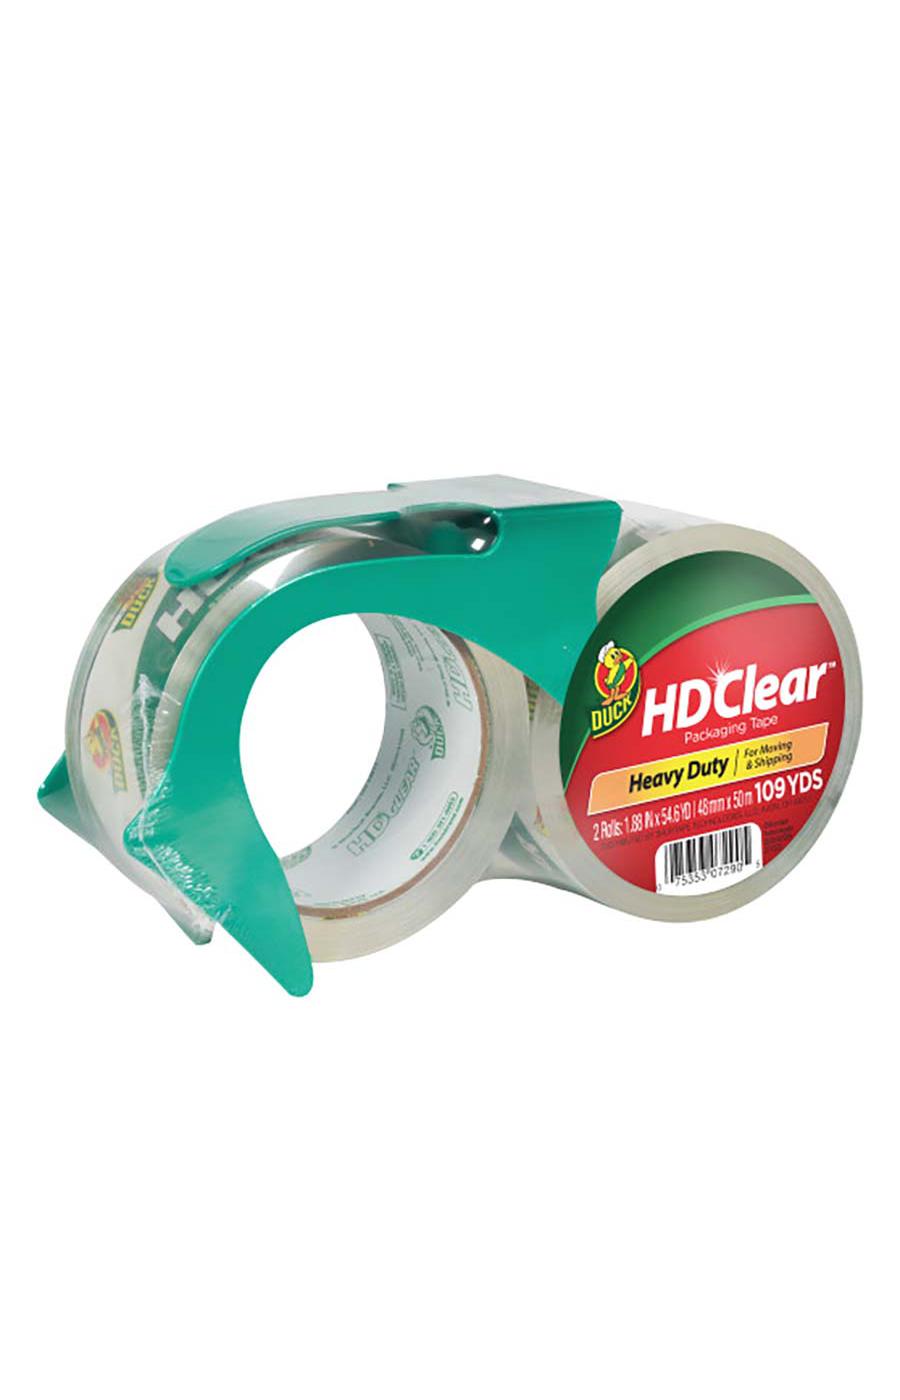 Duck HD Clear Heavy Duty Packing Tape with Dispenser - Shop Adhesives & Tape  at H-E-B